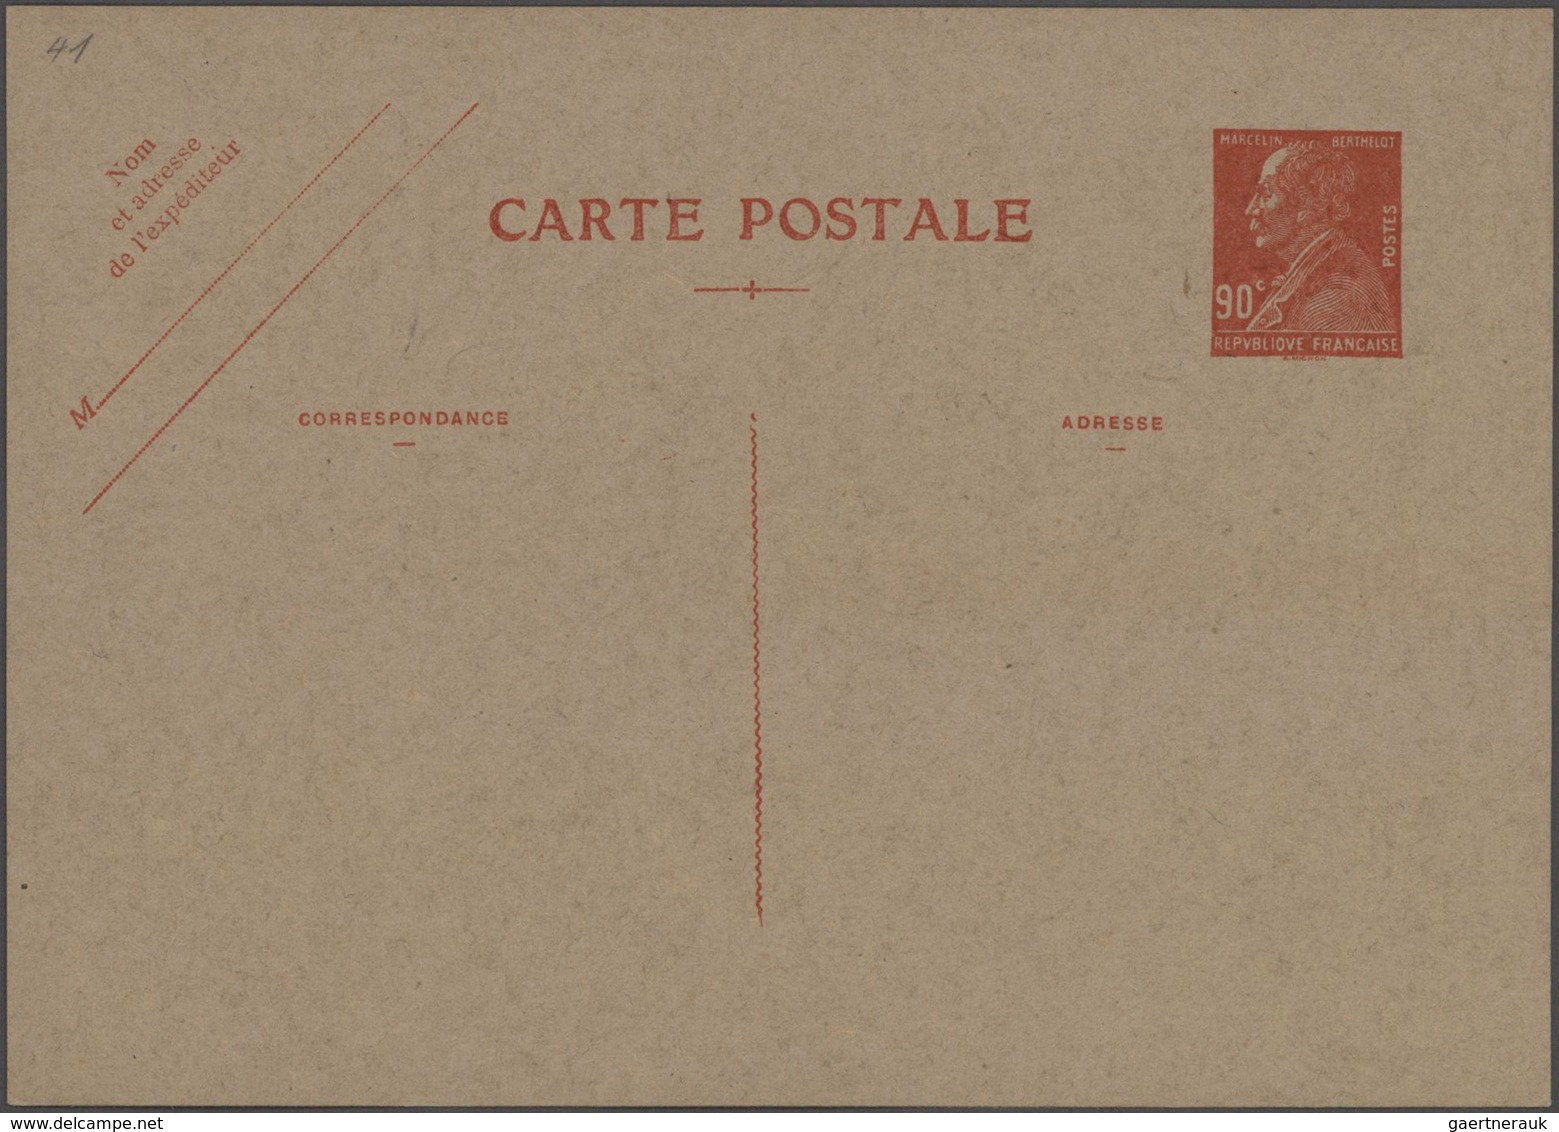 Frankreich - Ganzsachen: 1870/1935 Collection of about 270 unused and used postal stationeries in la